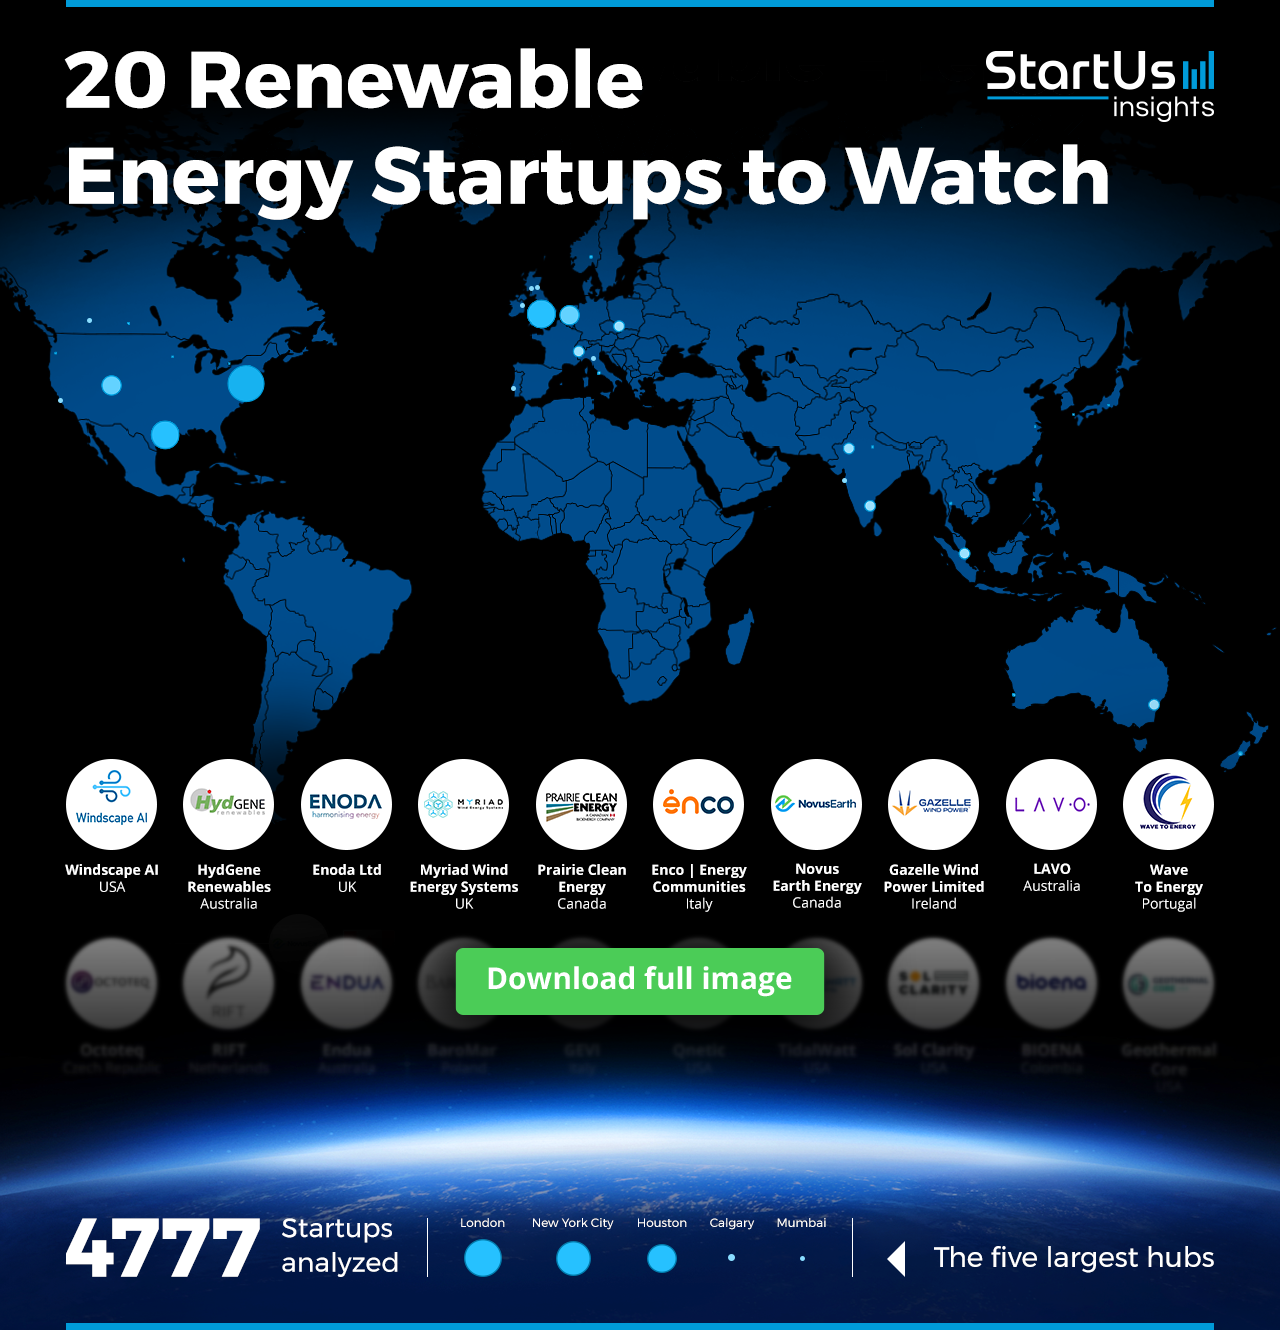 Renewable-Energy-Startups-to-Watch-Heat-Map-Blurred-StartUs-Insights-noresize